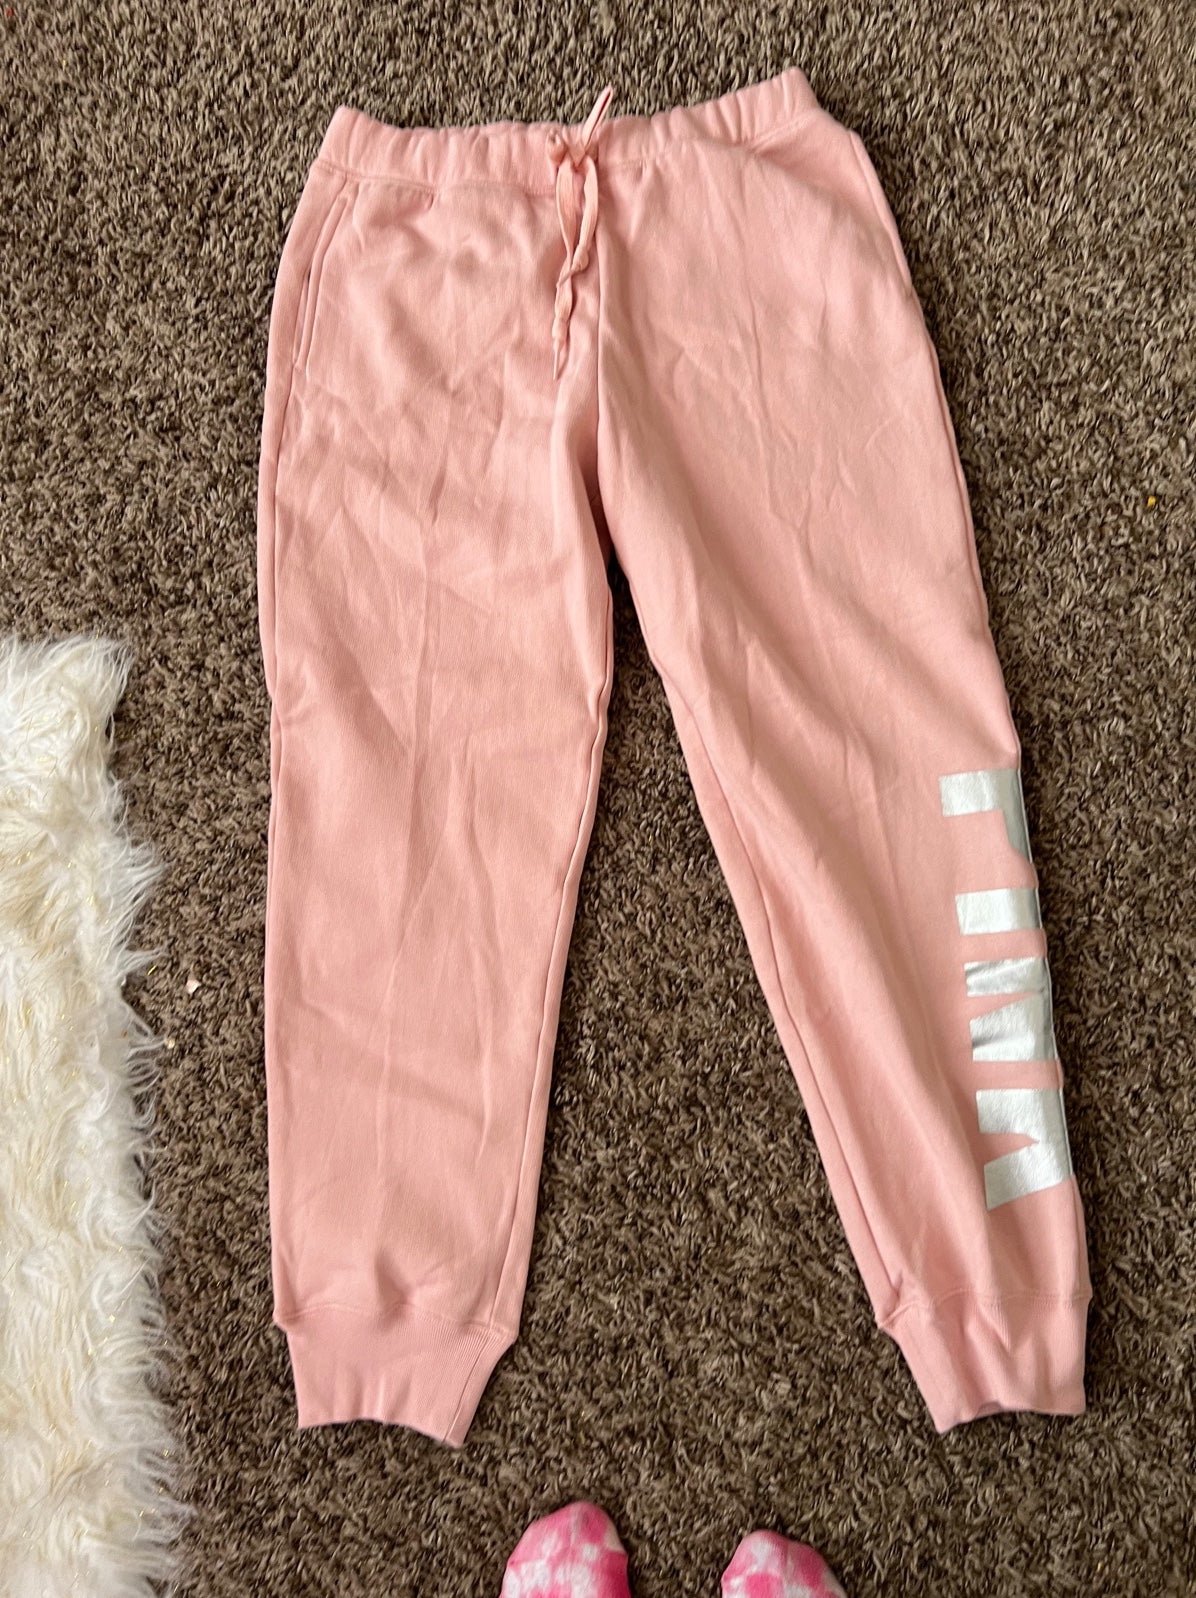 the Lowest price VS Pink Everyday Lounge Relaxed Jogger Sweatpants GUa8hcjLg just buy it